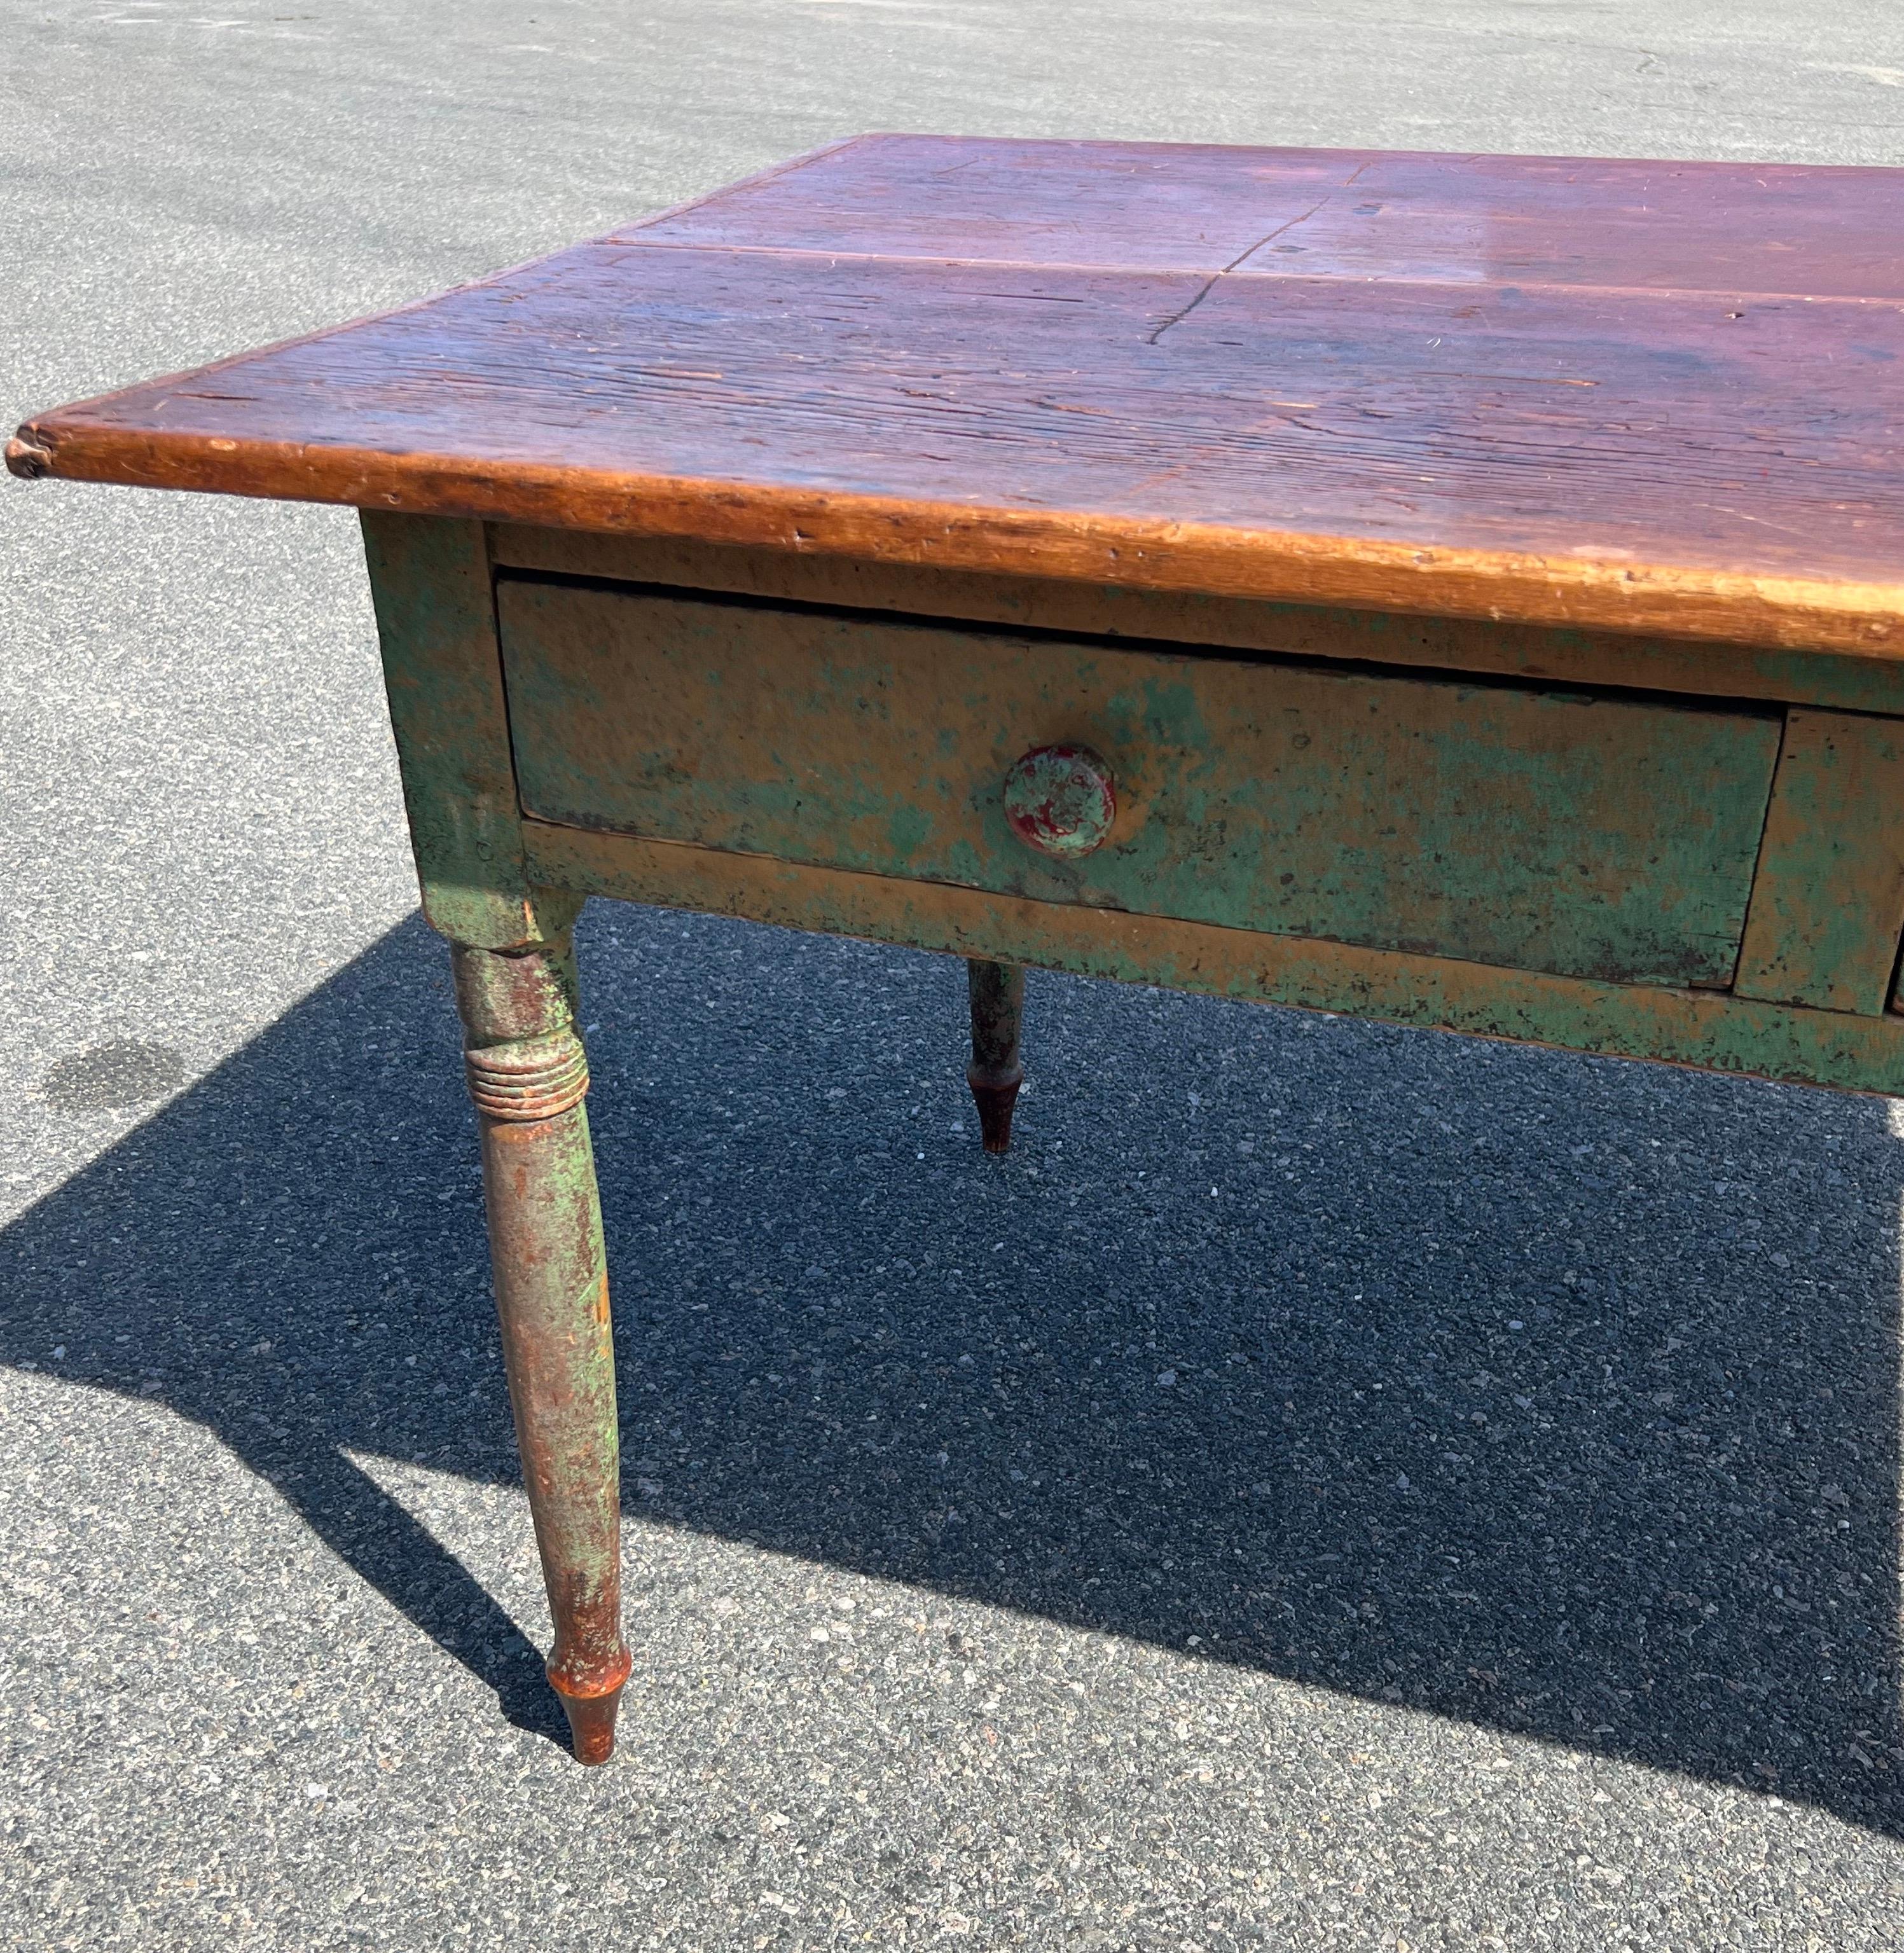 19th Century Pine Desk Table.  Unpainted two board top with thin breadboard ends.  Base in old green and yellow paint over original red paint.  Two drawers, side-by-side, and turned legs.  Overall pegged construction.